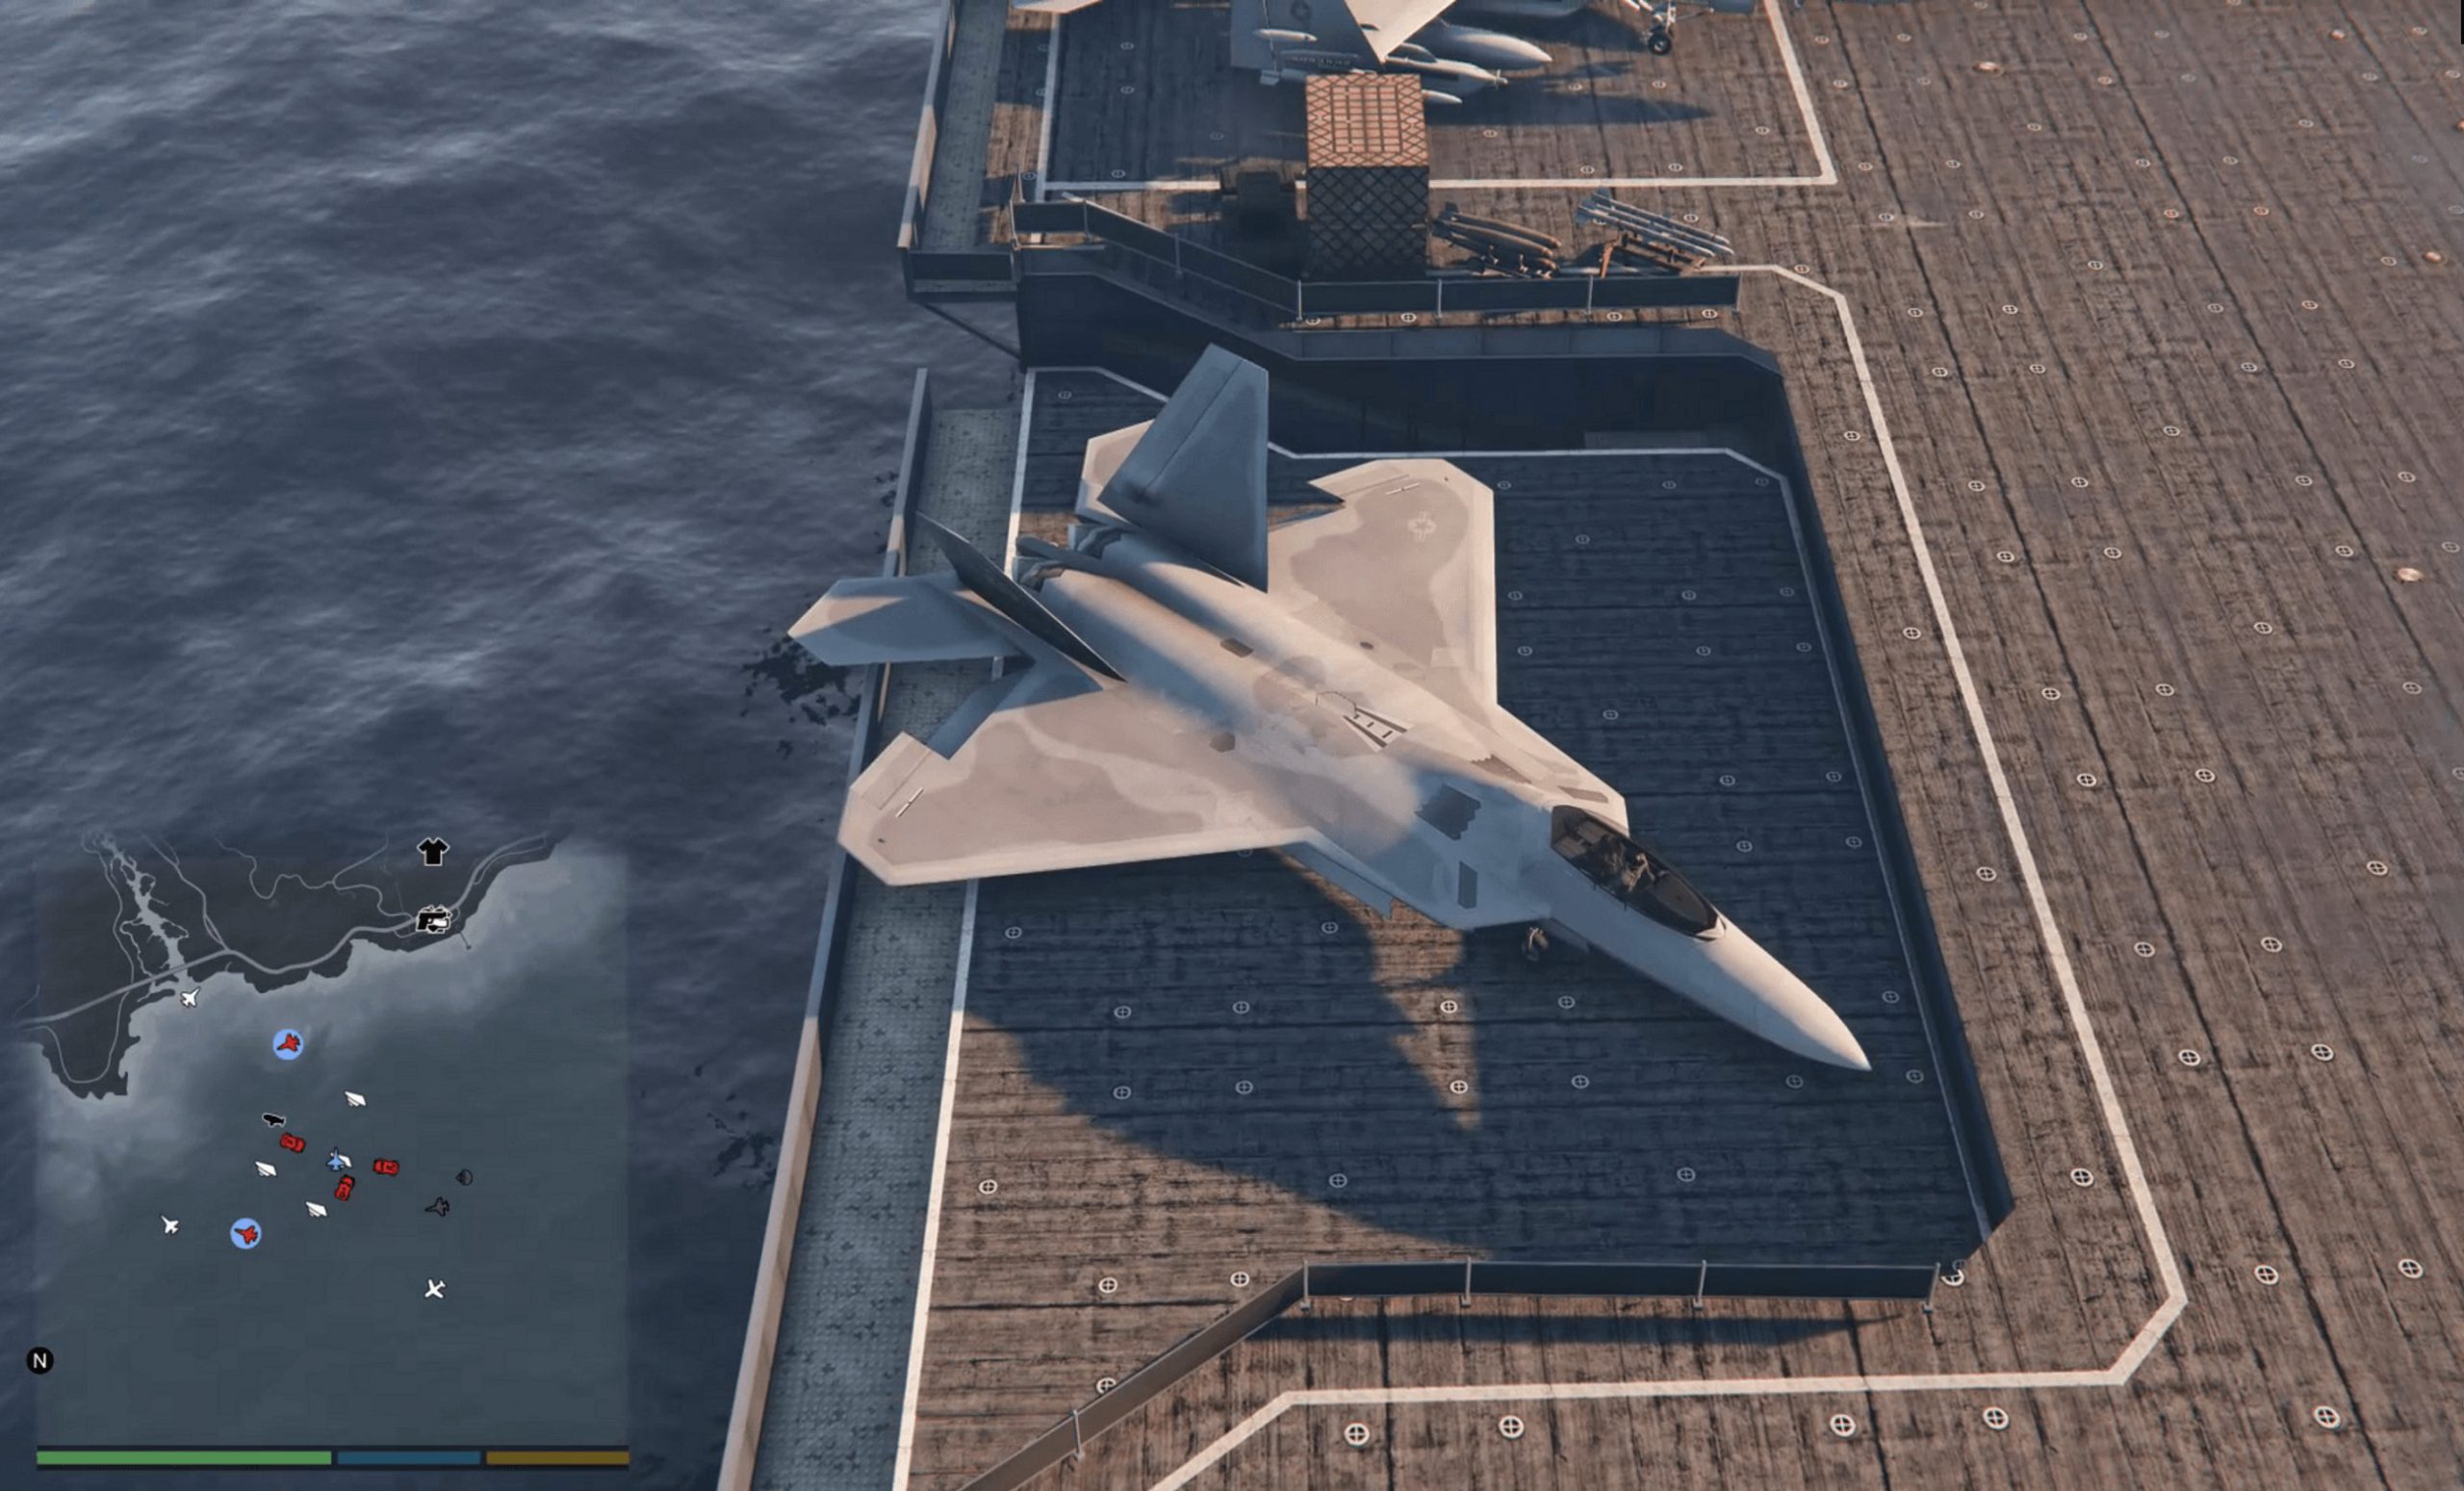 Dogfight: War Mod & Drivable Carrier with Working Elevators 3.0.1